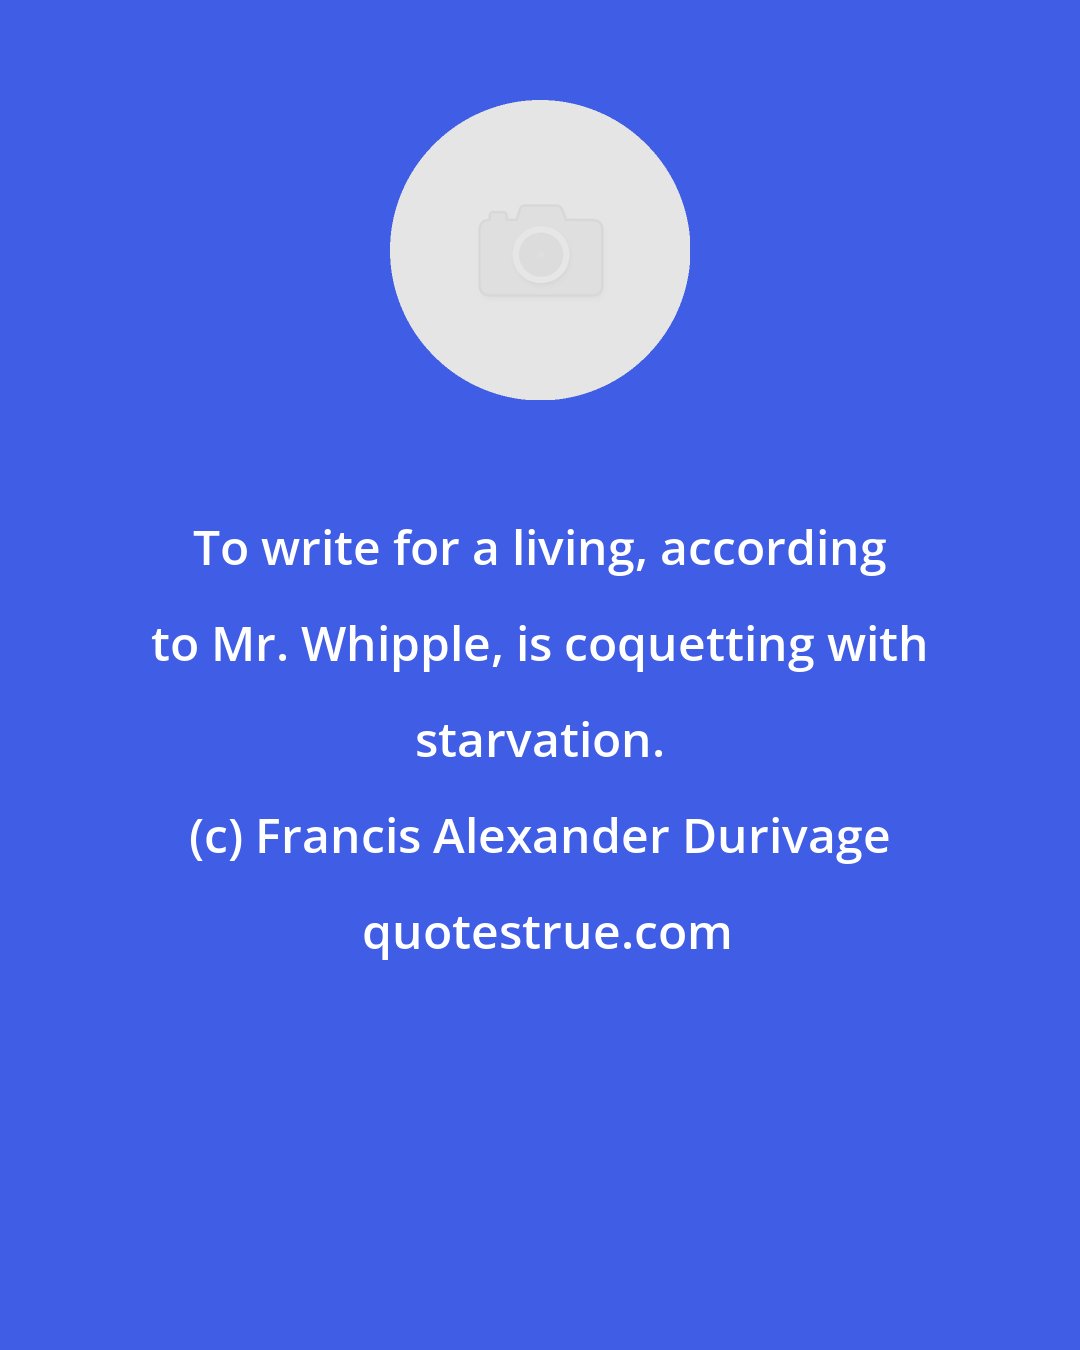 Francis Alexander Durivage: To write for a living, according to Mr. Whipple, is coquetting with starvation.